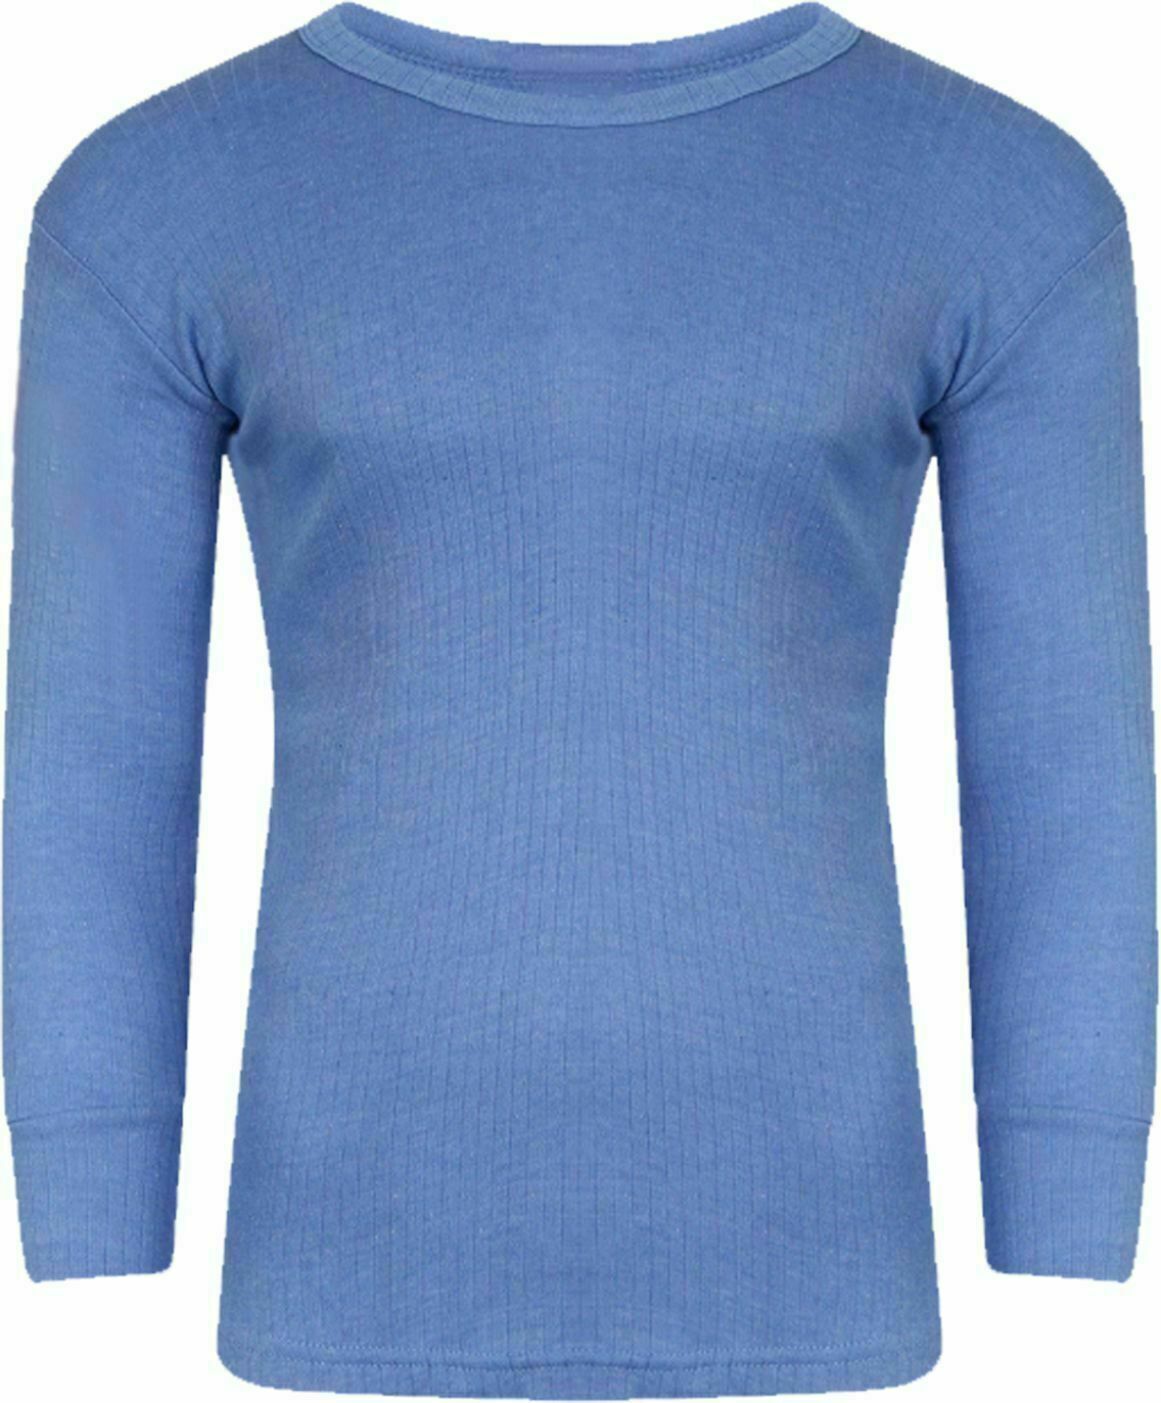 PACK OF 3 Mens Thermal Long Sleeves T-Shirts Warm Vests Winter Underwear Base Layer Top